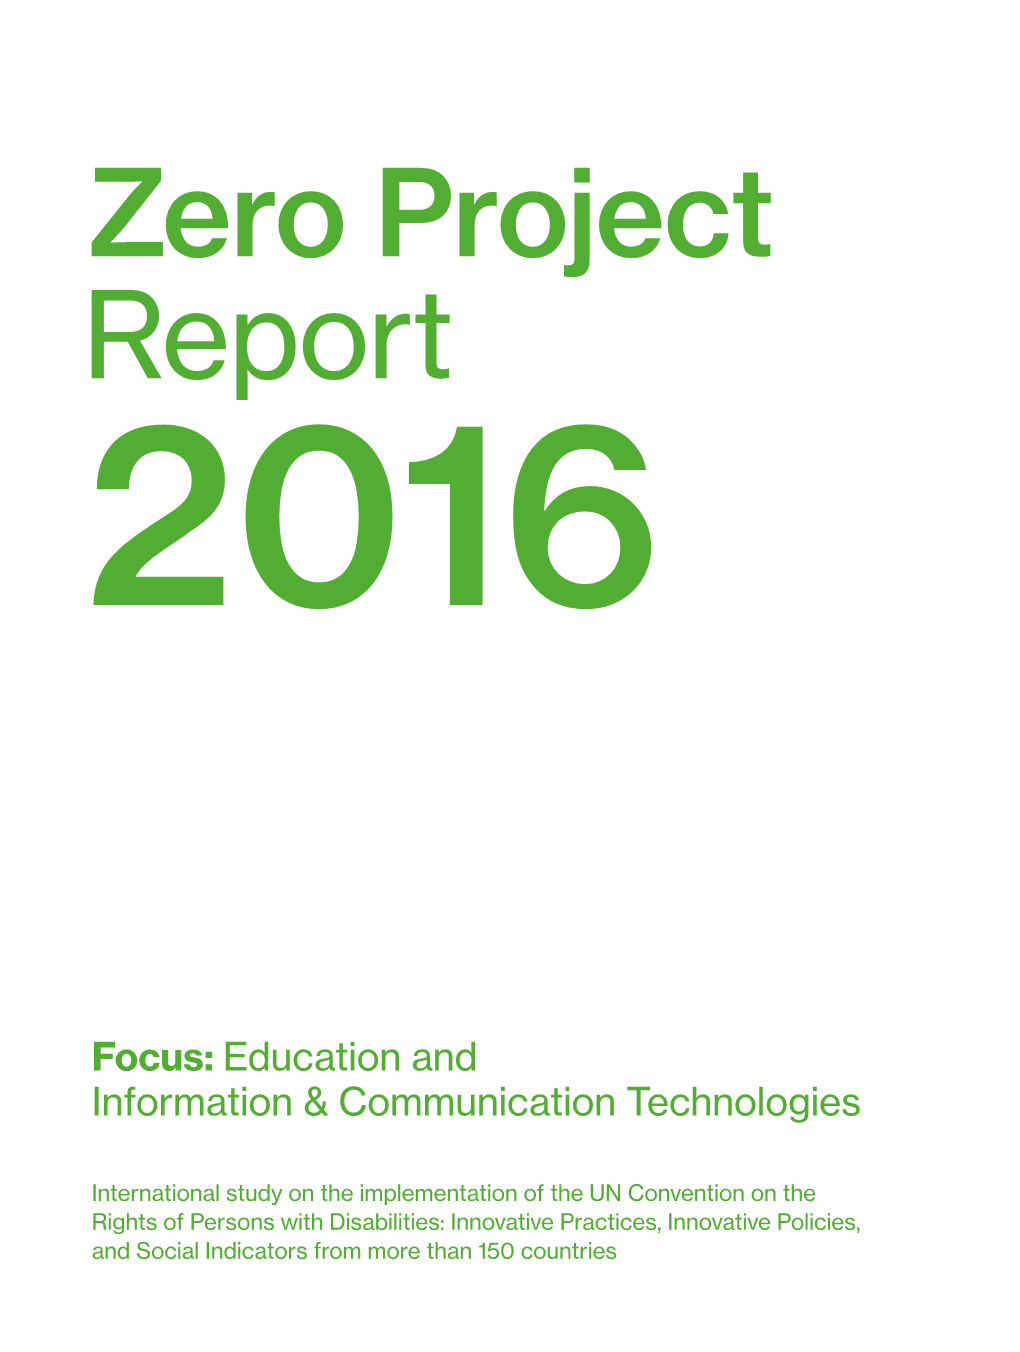 Download Versions, and for Further Analysis of the Zero Project, Visit